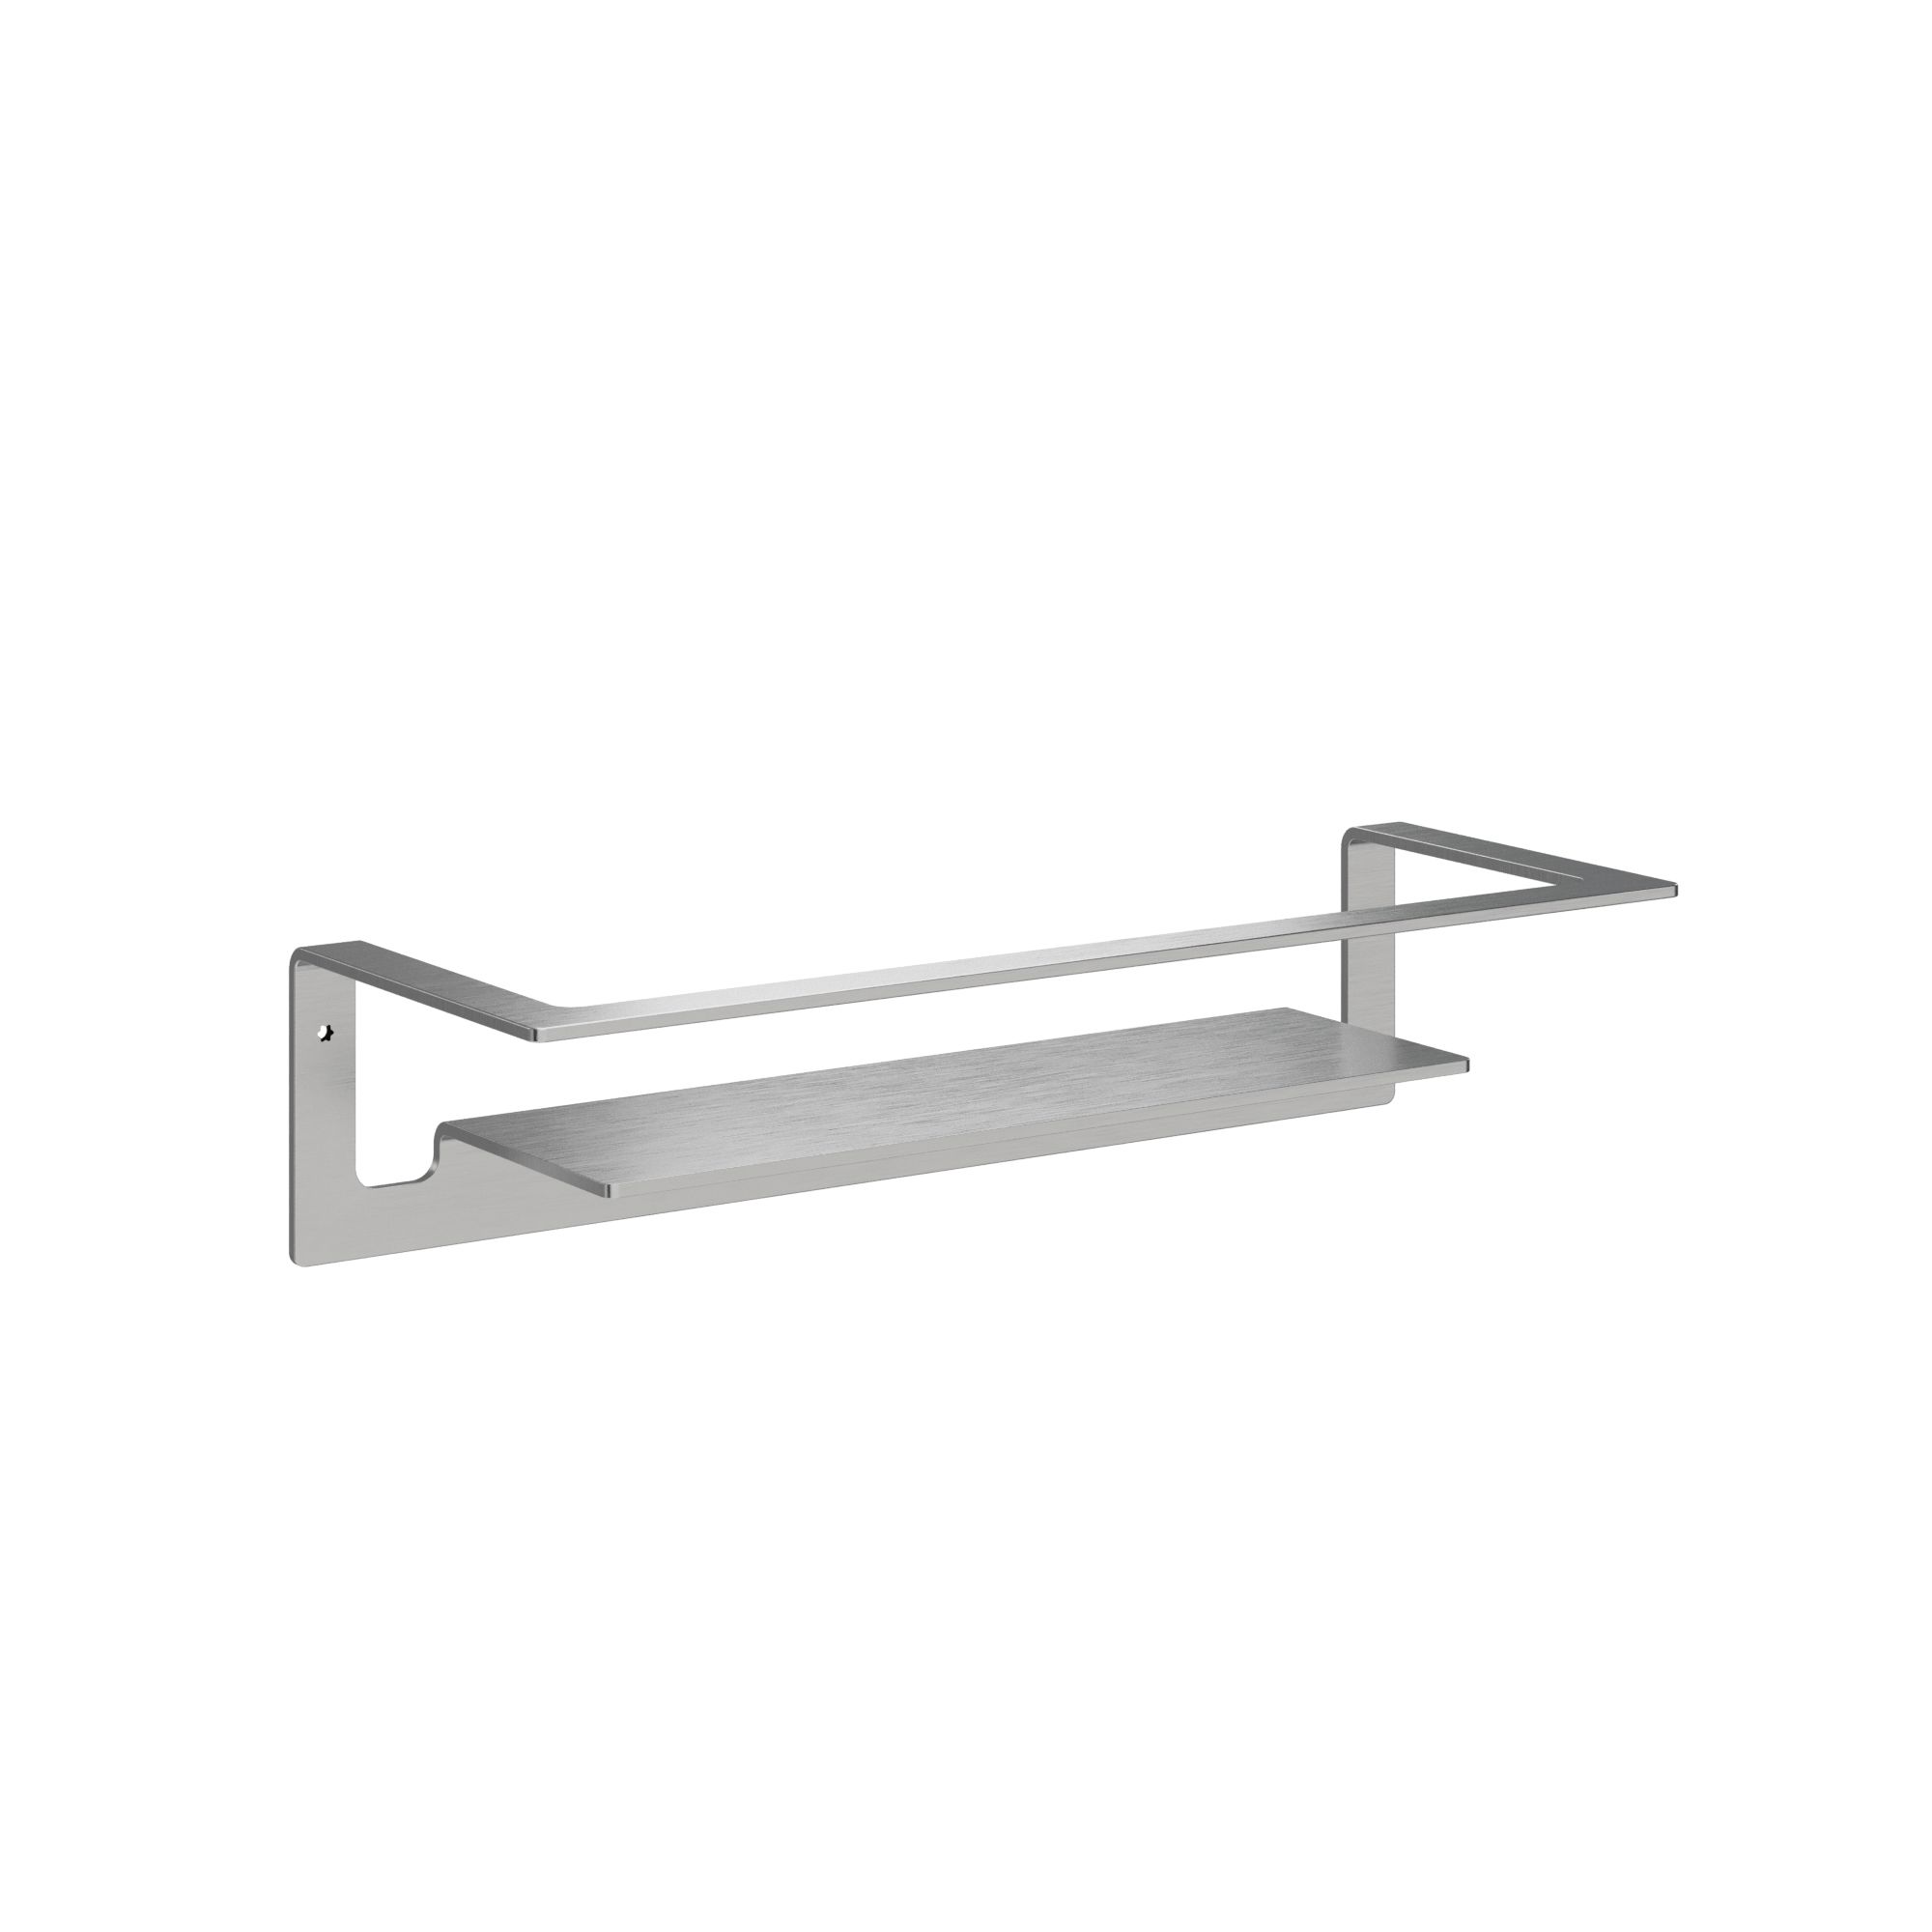 The Fig Shelf with Rail 300mm